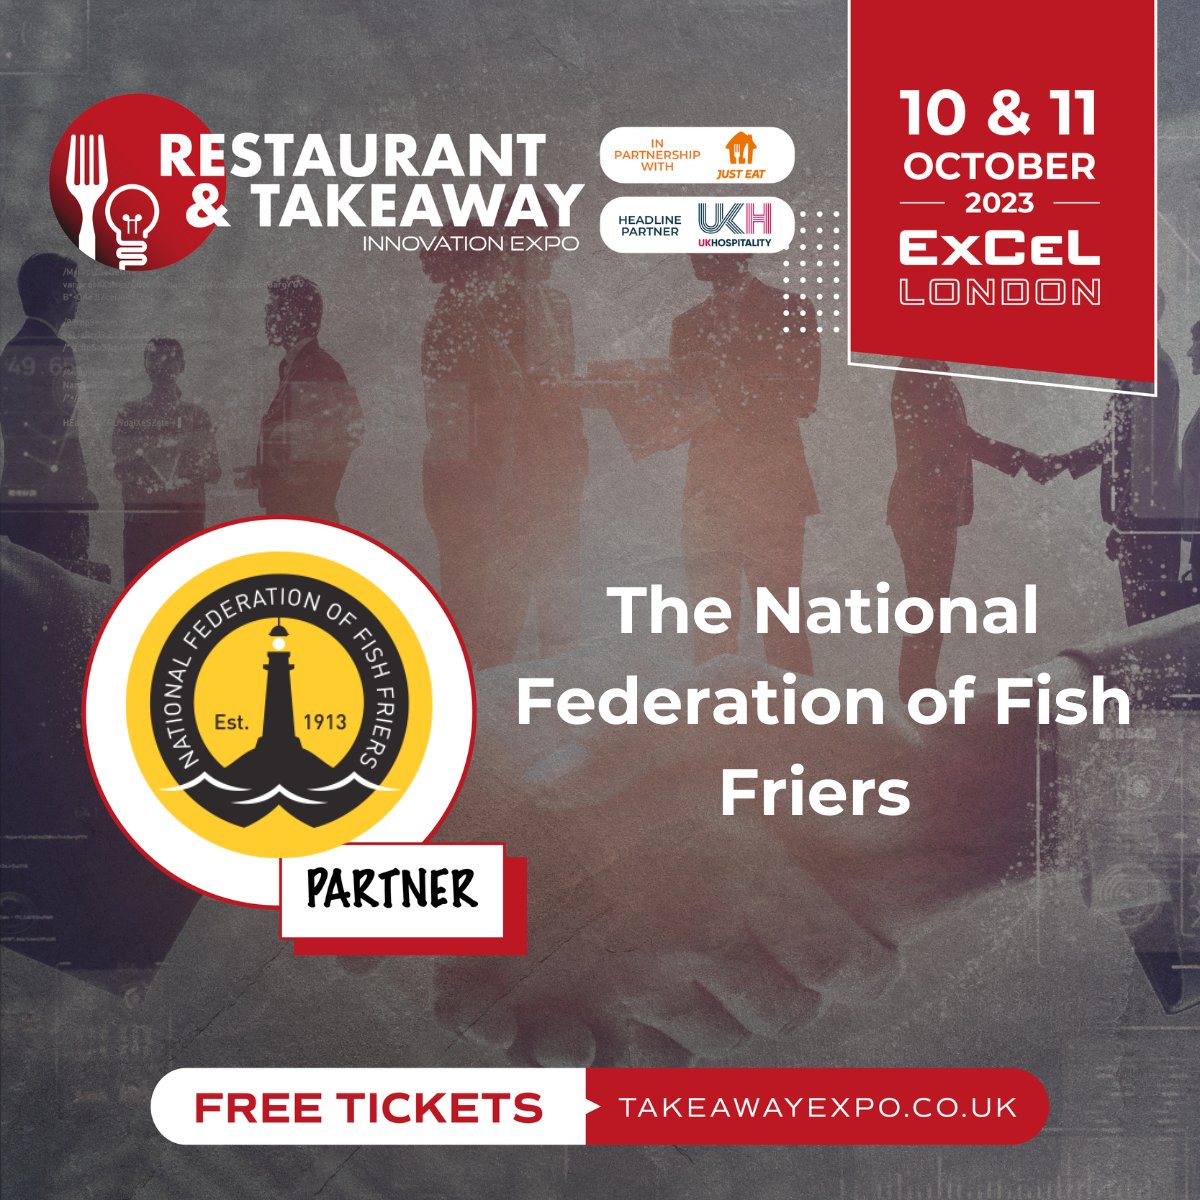 We are partnered with... @NFFF_UK! 🍟🐟 Their membership comes with a range of benefits and support ➯ nfff.co.uk Annually, they organise the National Fish and Chip Awards. thefishandchipawards.com Register for #RTIE23 here📍 bitly.ws/TGAW #HOSPOB2B